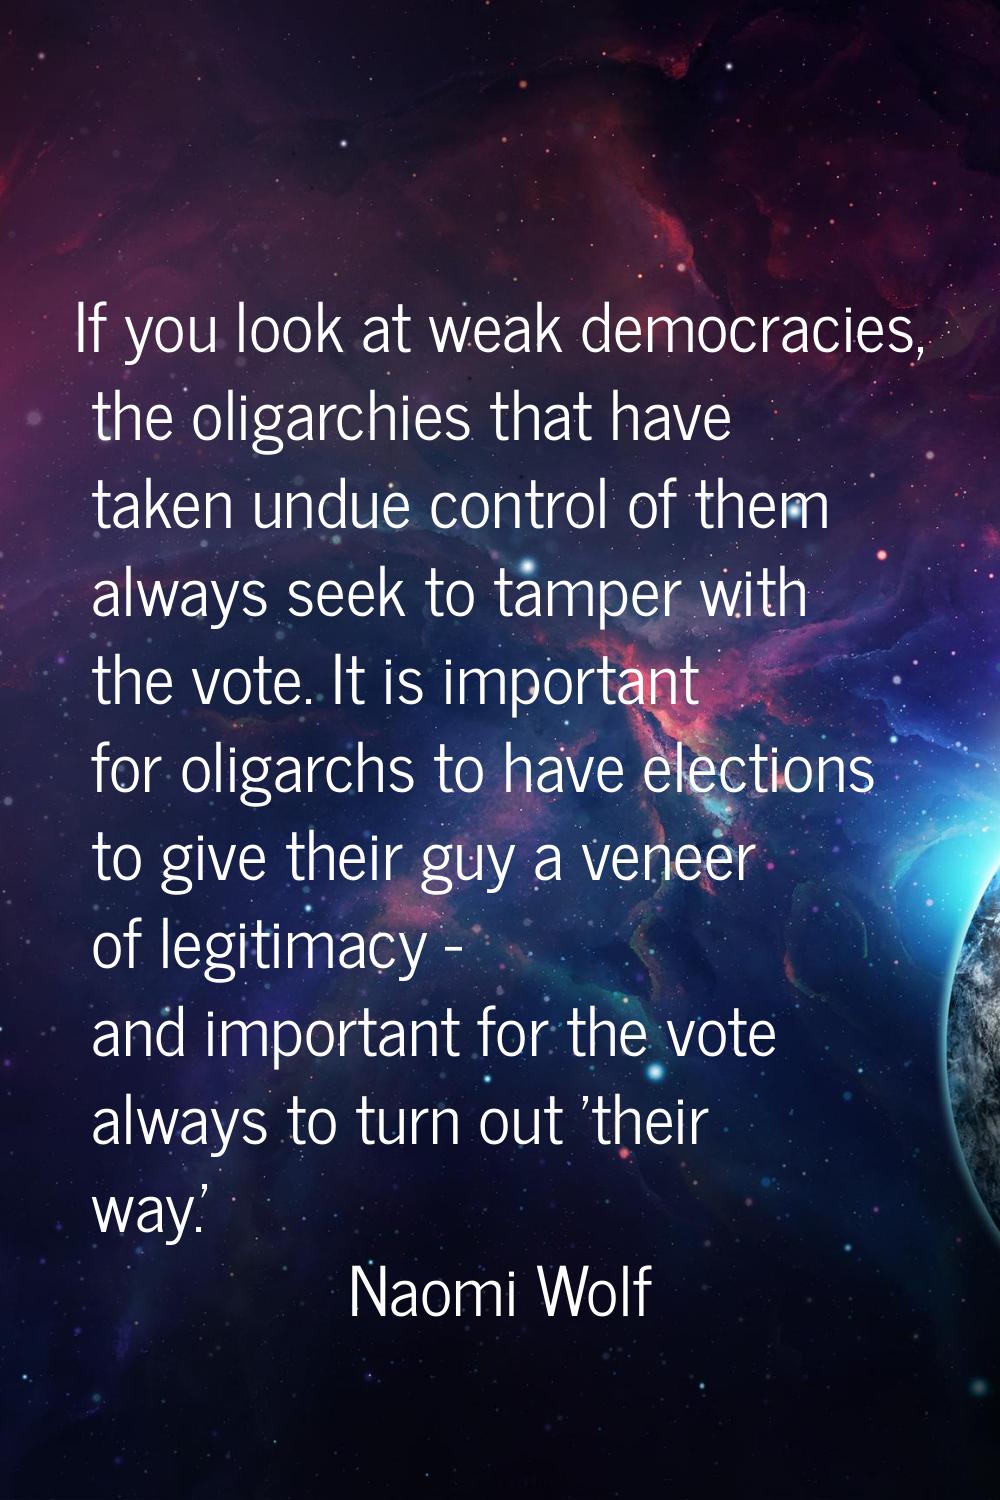 If you look at weak democracies, the oligarchies that have taken undue control of them always seek 